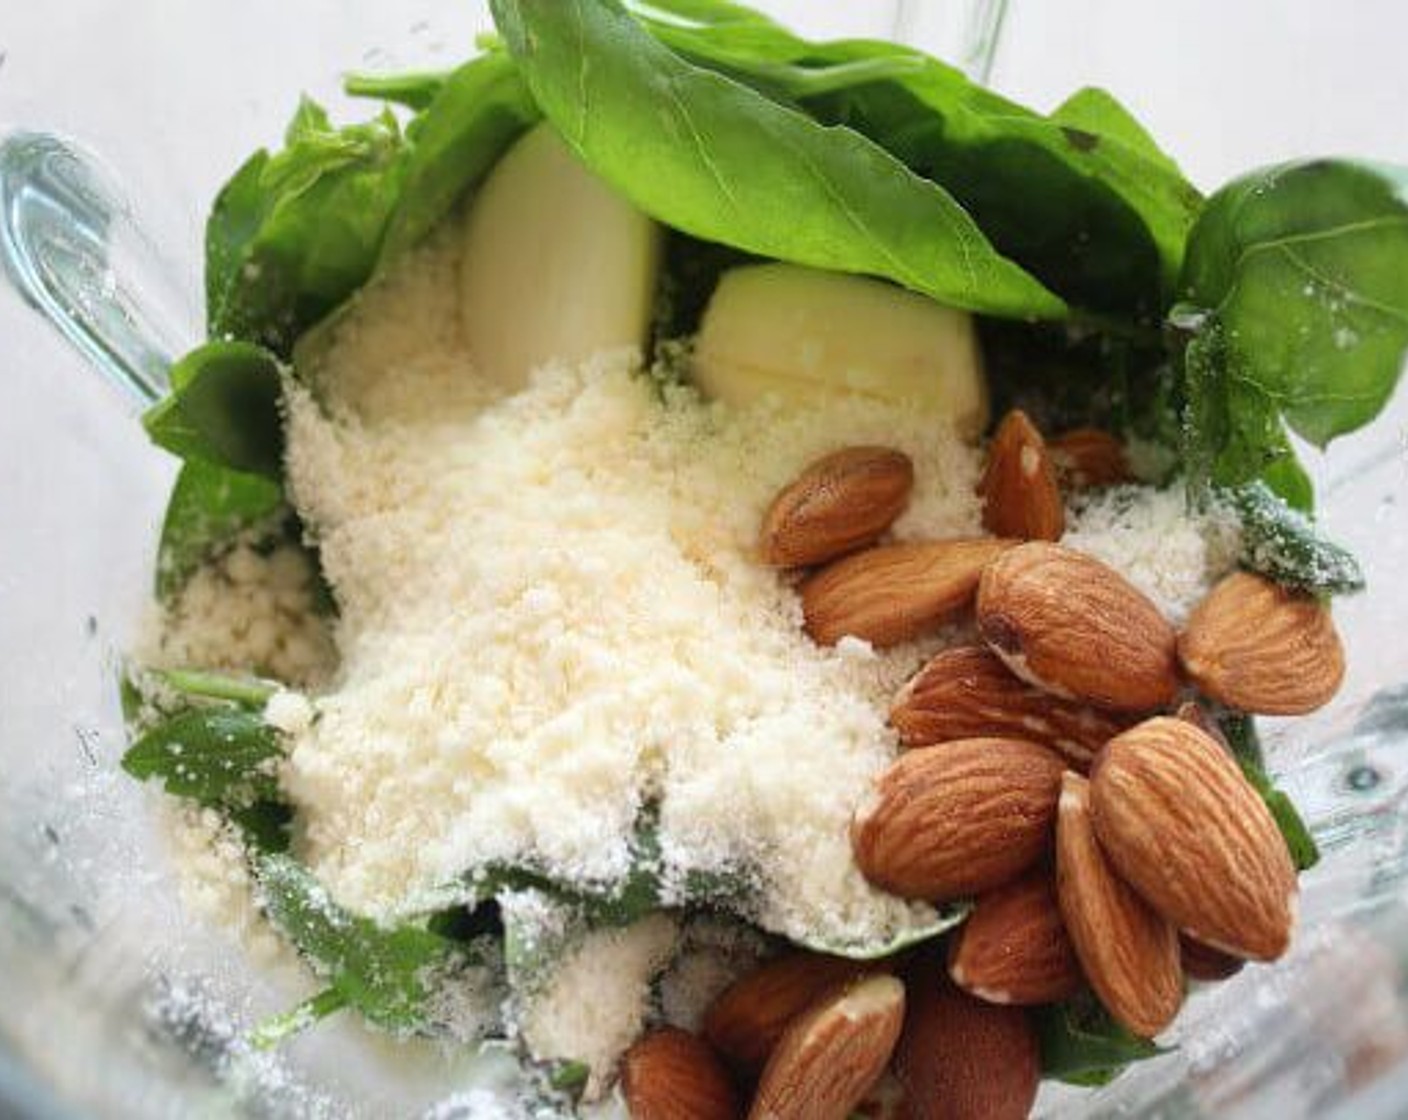 step 1 Place Fresh Basil Leaves (2 cups), Garlic (2 cloves), Grated Parmesan Cheese (1/3 cup), Almonds (1/4 cup), Salt (to taste), and Ground Black Pepper (to taste) in a blender and pulse until almost smooth. Now pour the Olive Oil (1/3 cup) (plus 2 Tbsp) in slowly, continuing to pulse the mixture until it comes together.